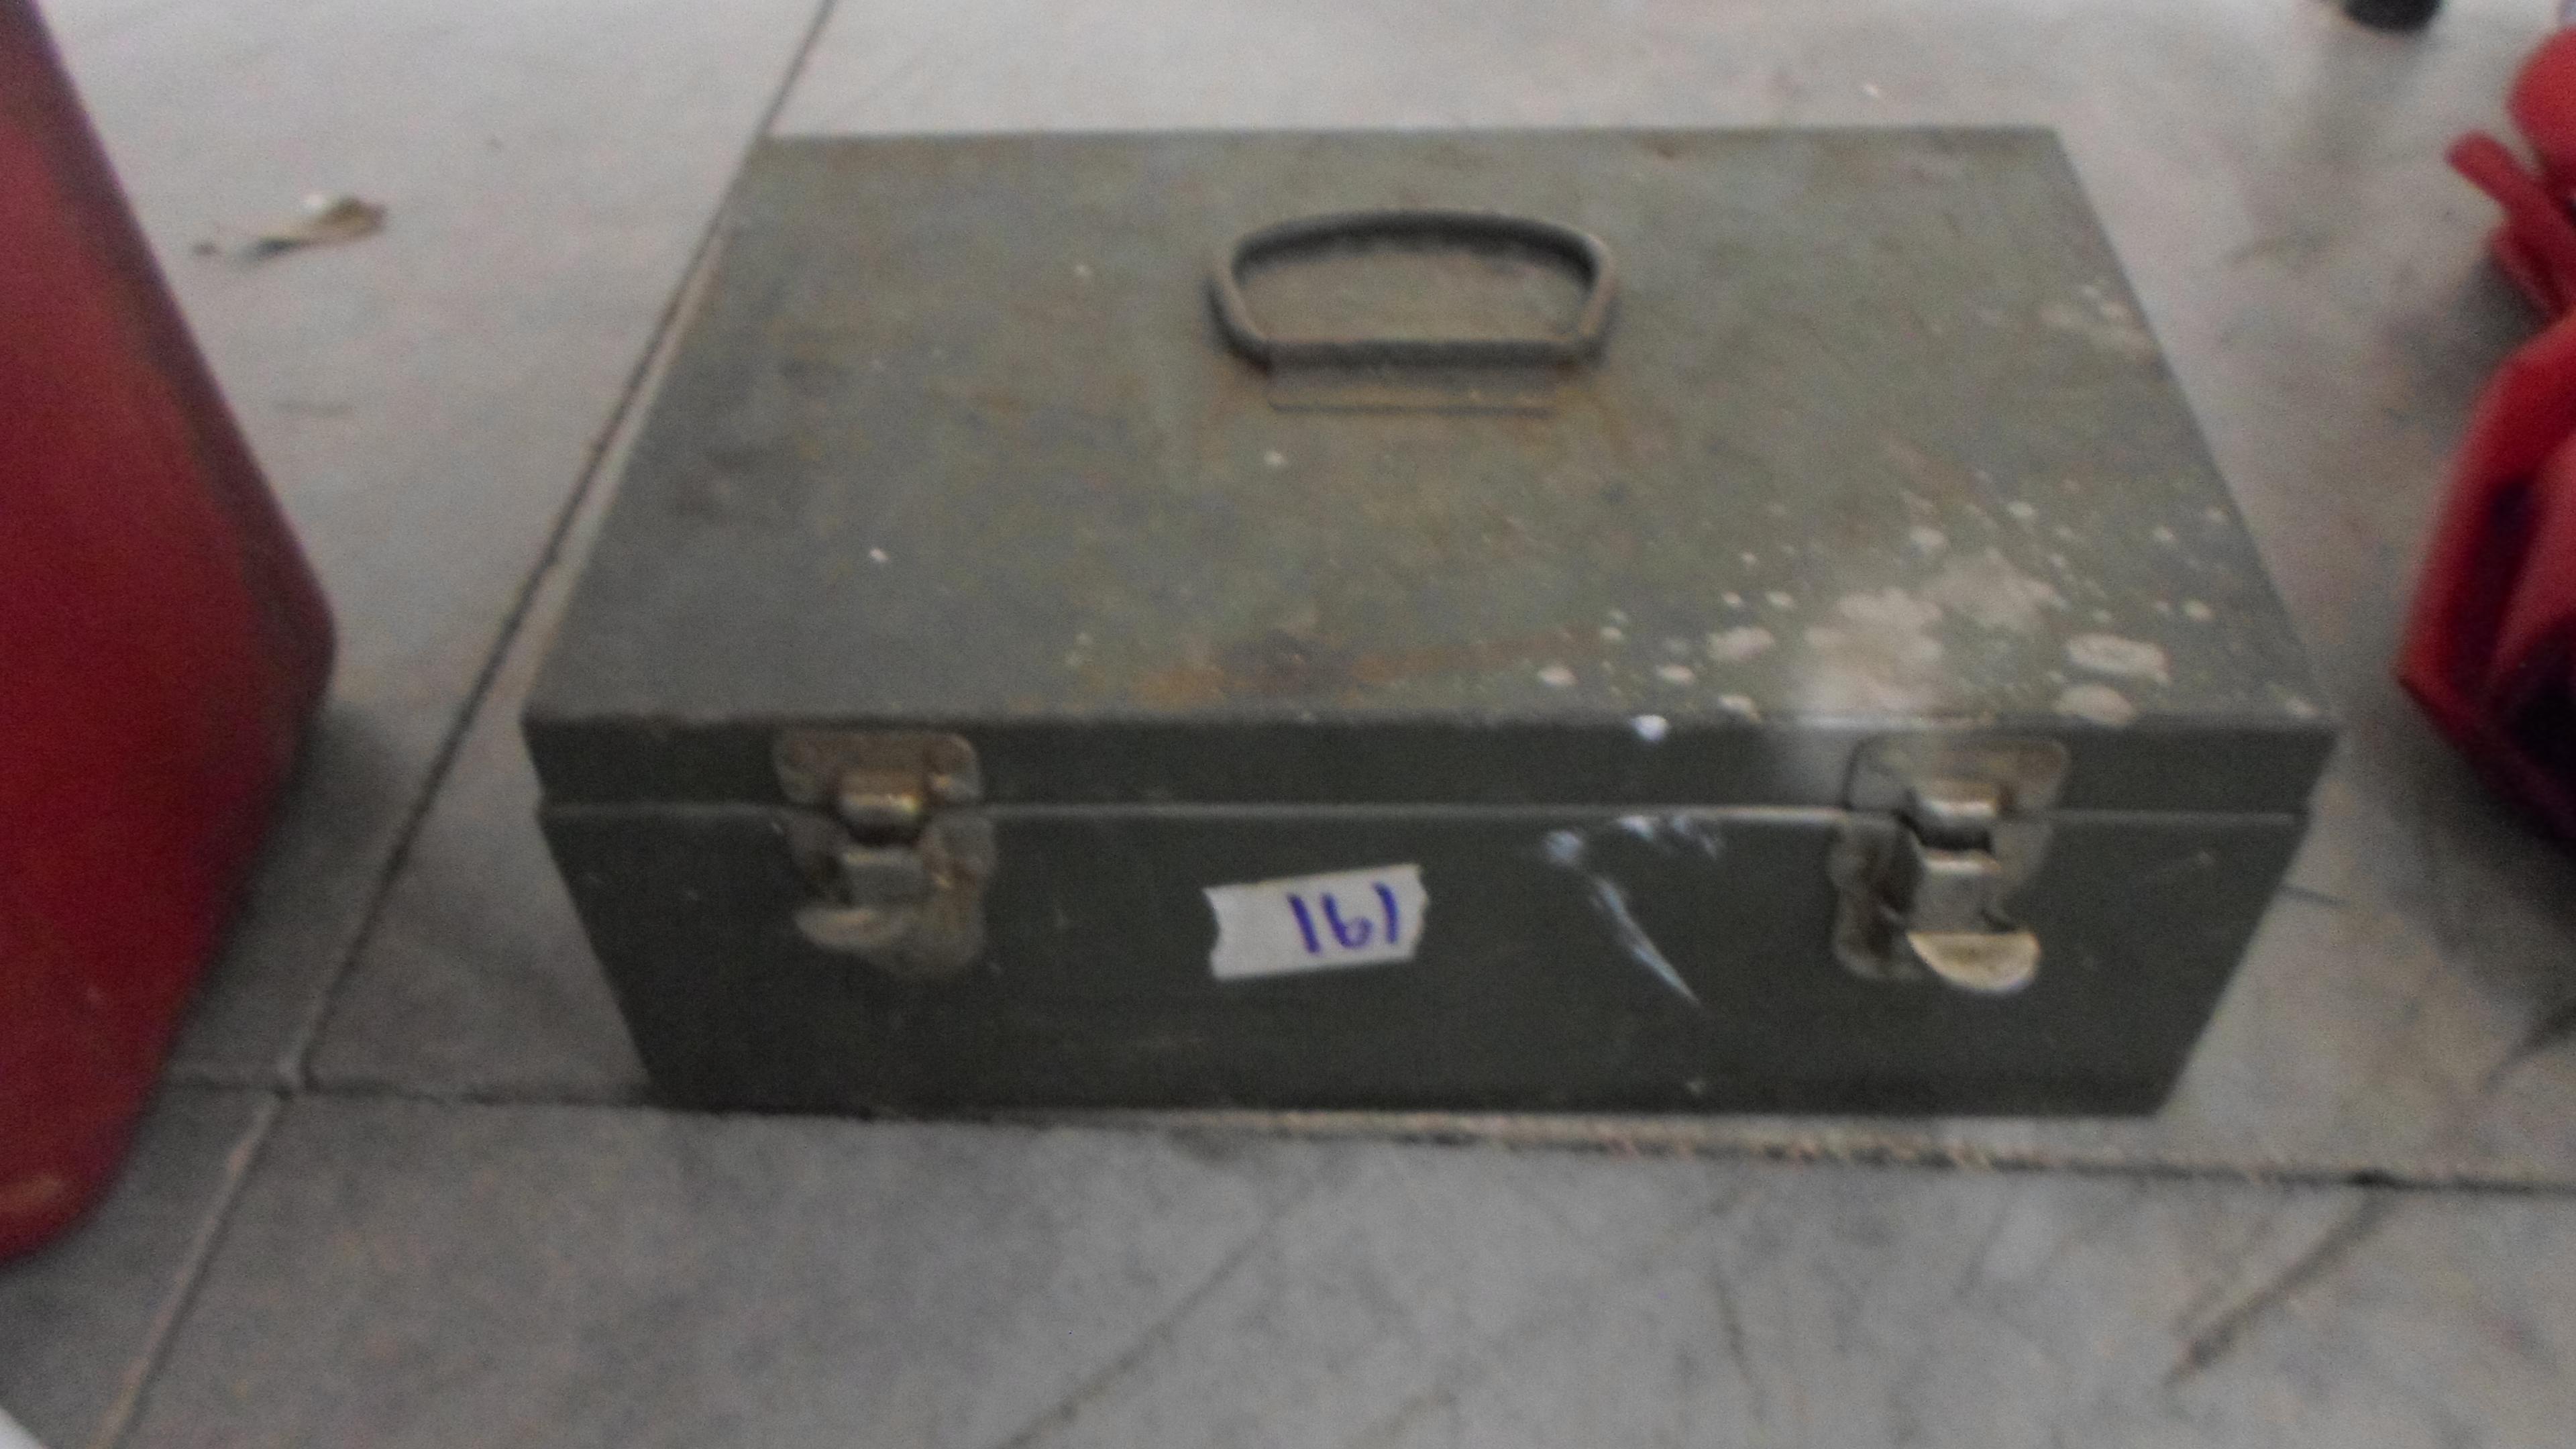 tool box, military style metal box used for tools